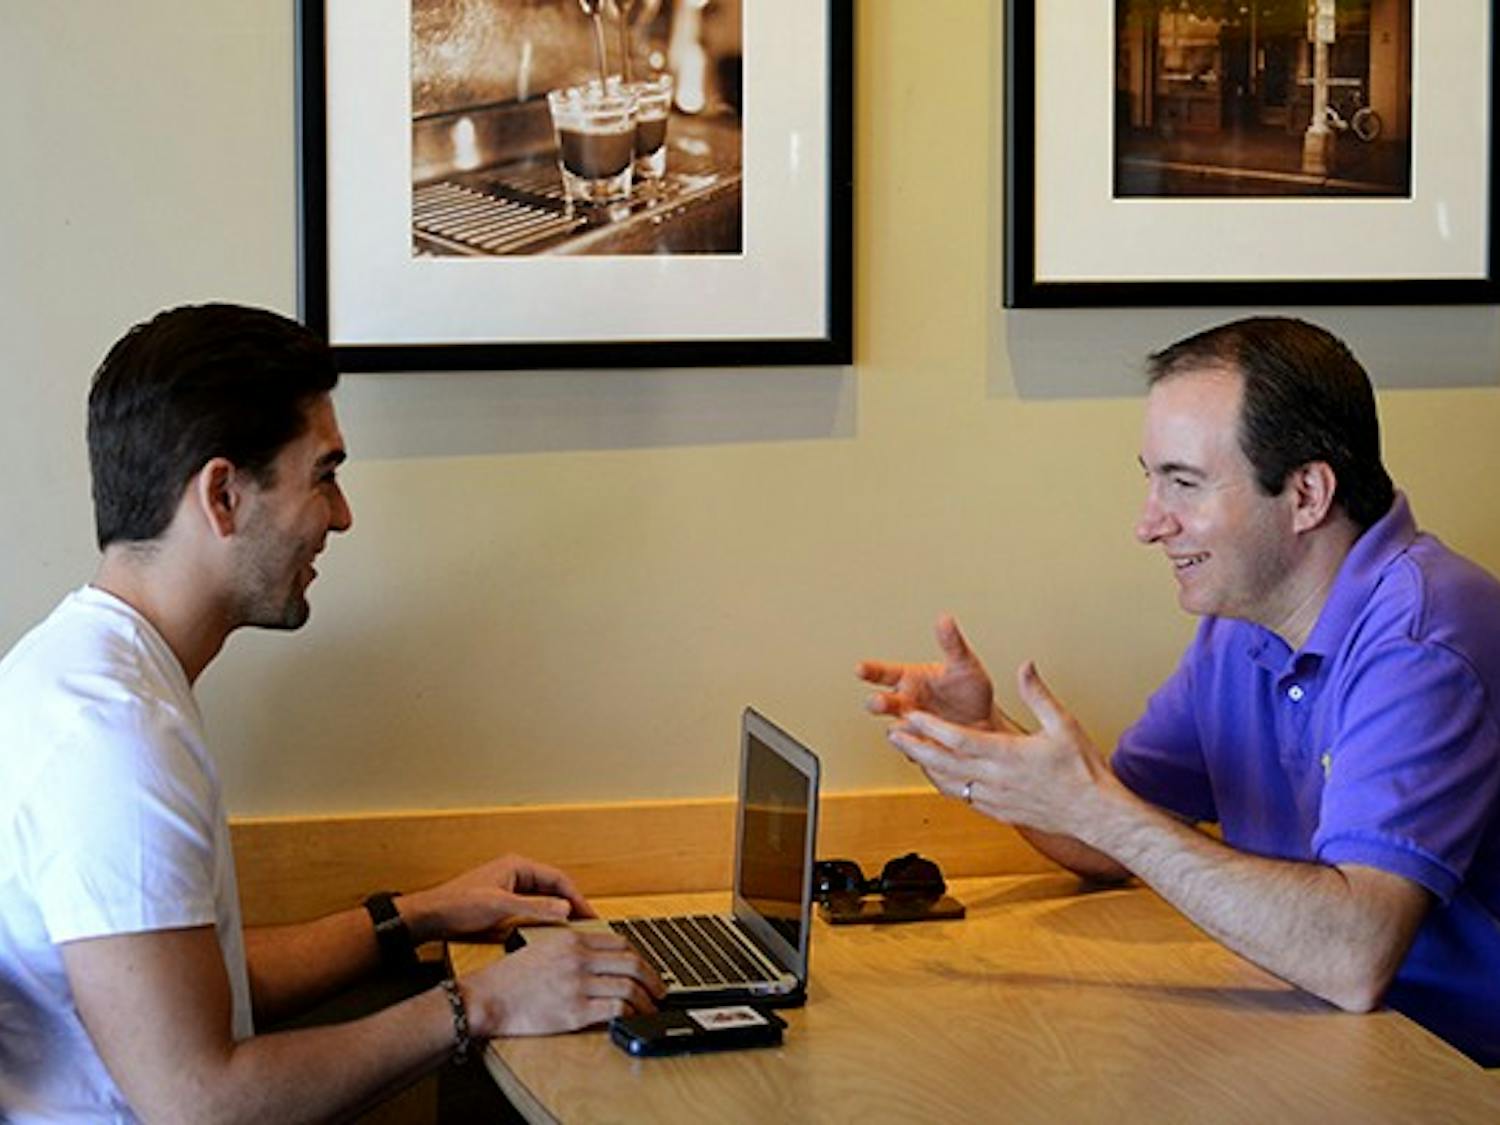 Louie Cesario, left, and CEO David Cogan discuss Eliances at a Starbucks in Tempe on Monday, Oct. 27, 2014. They regularly meet at ASU Skysong to discuss new ideas about the company. (Photo by Jonathan Williams)